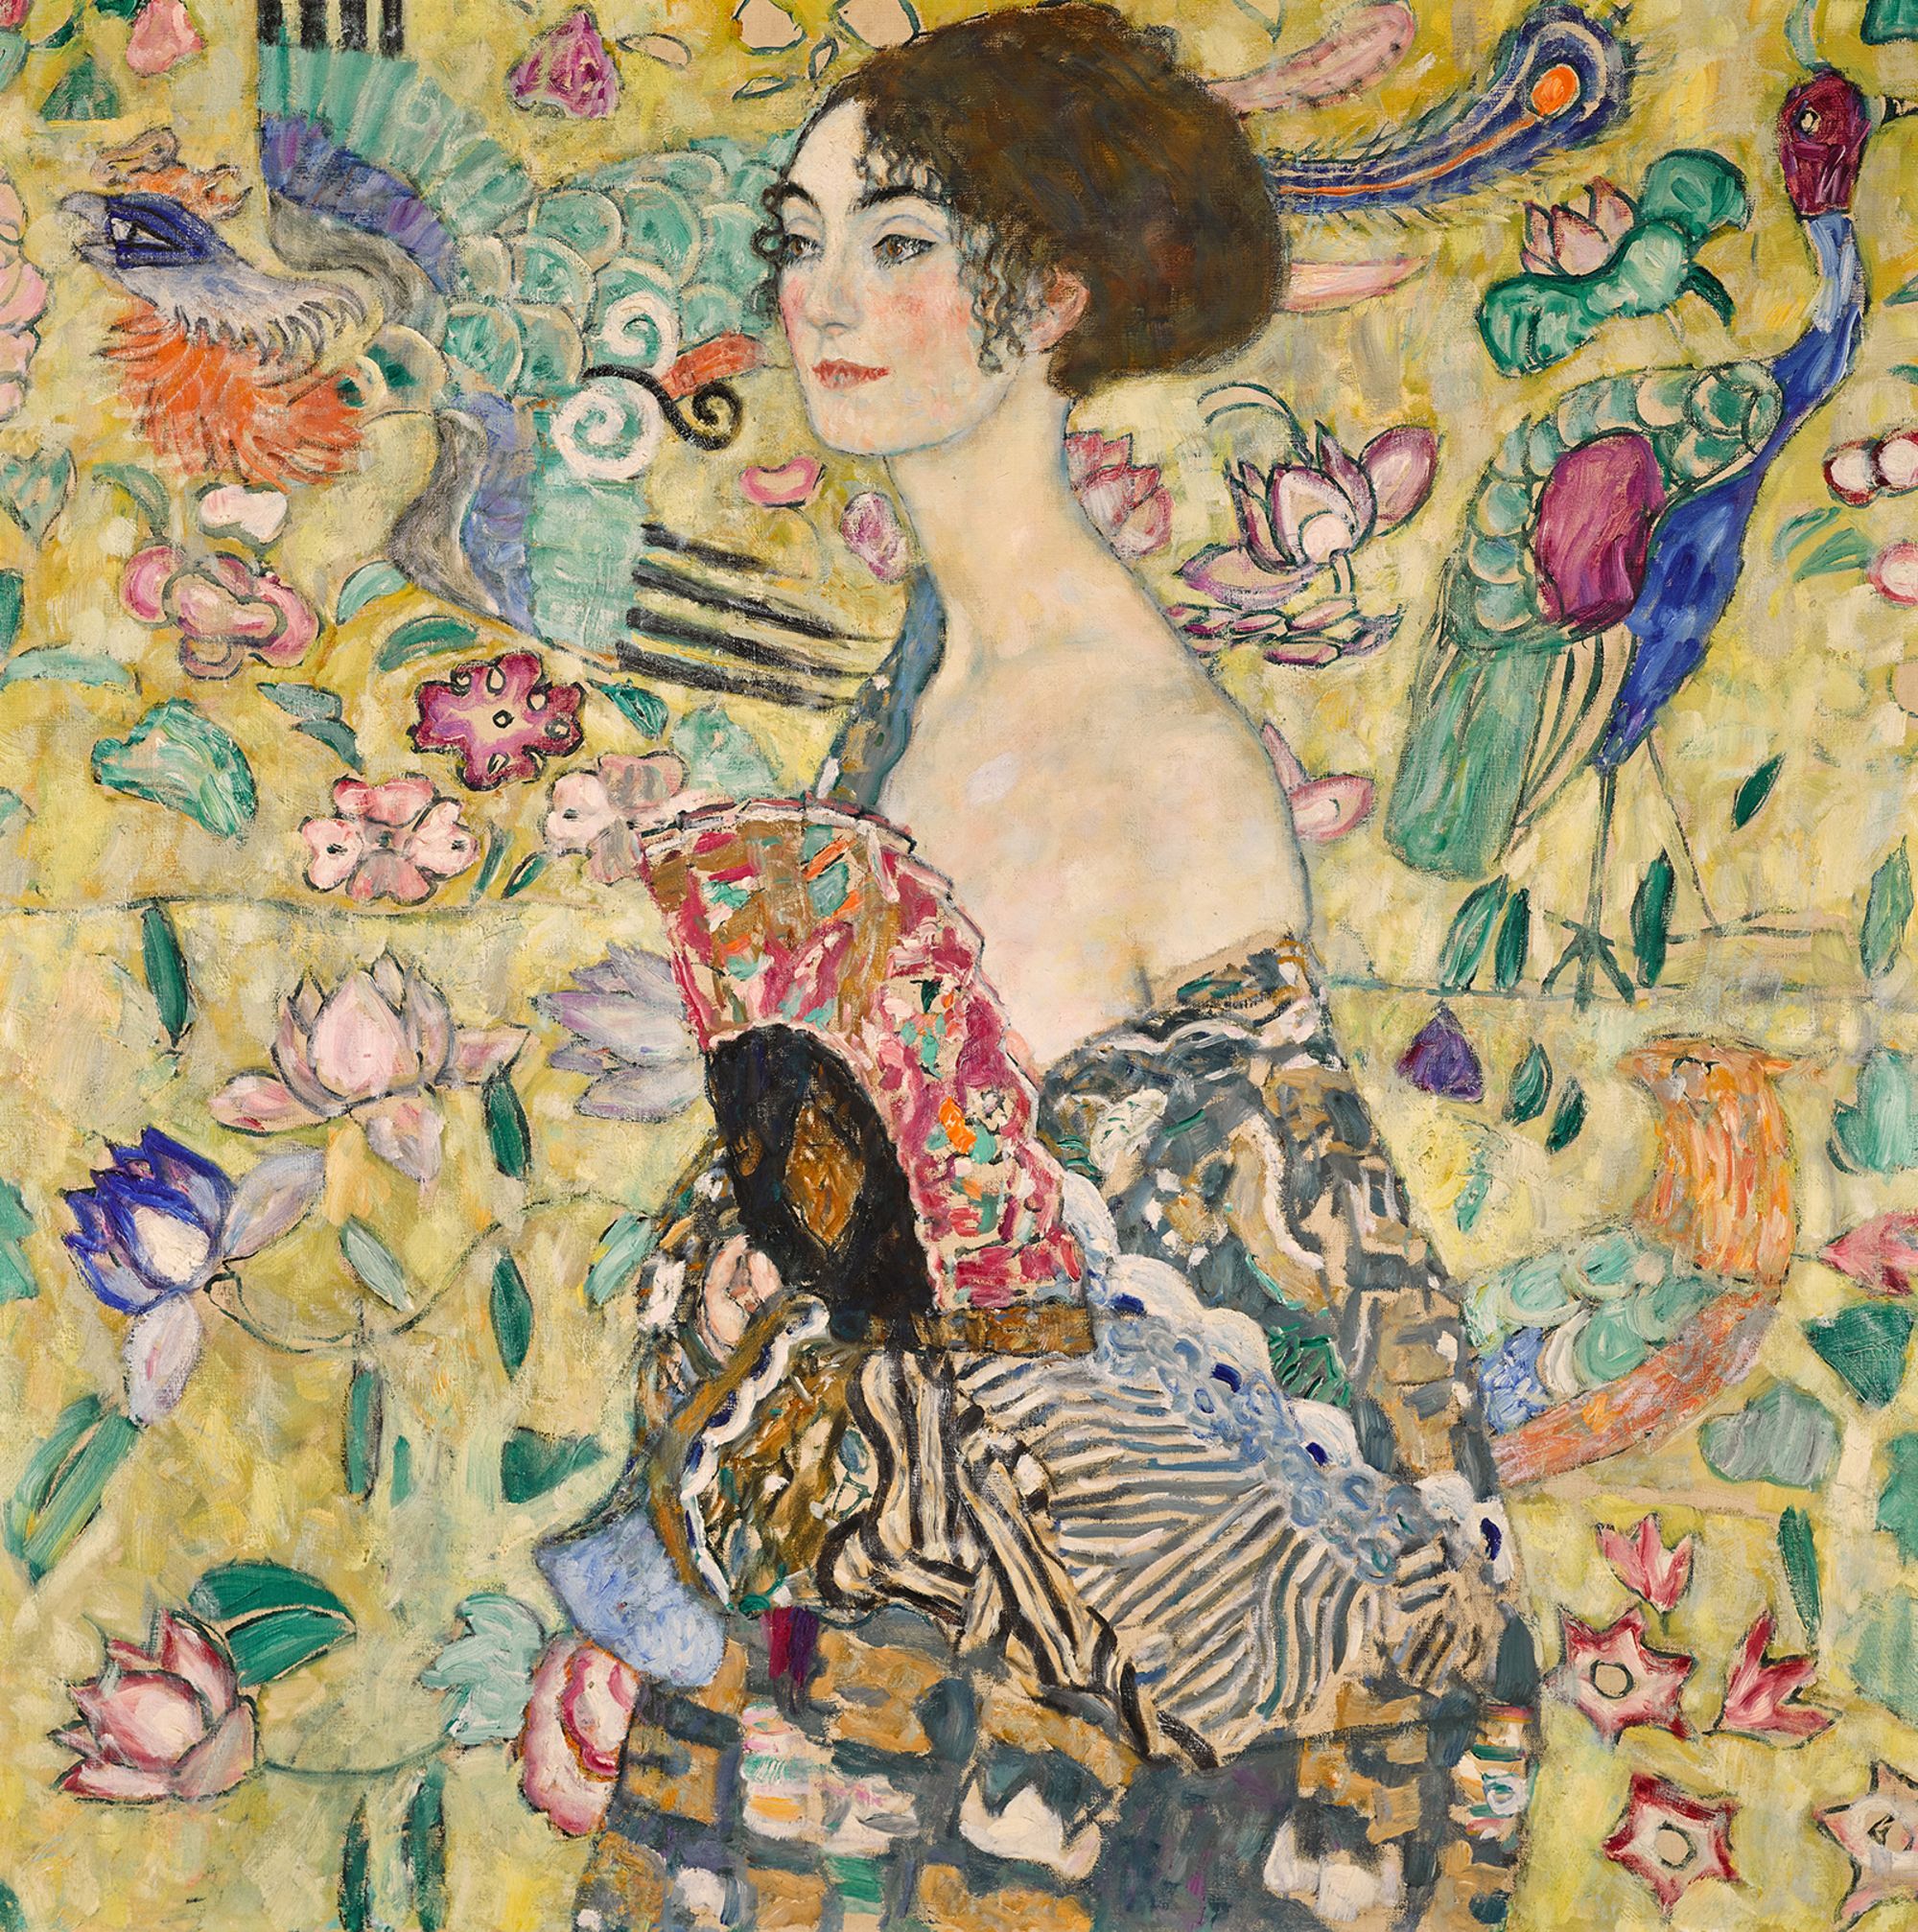 This picture shows "Dame mit Fächer (Lady with a Fan) painting, the last portrait Gustav Klimt completed before his untimely death.